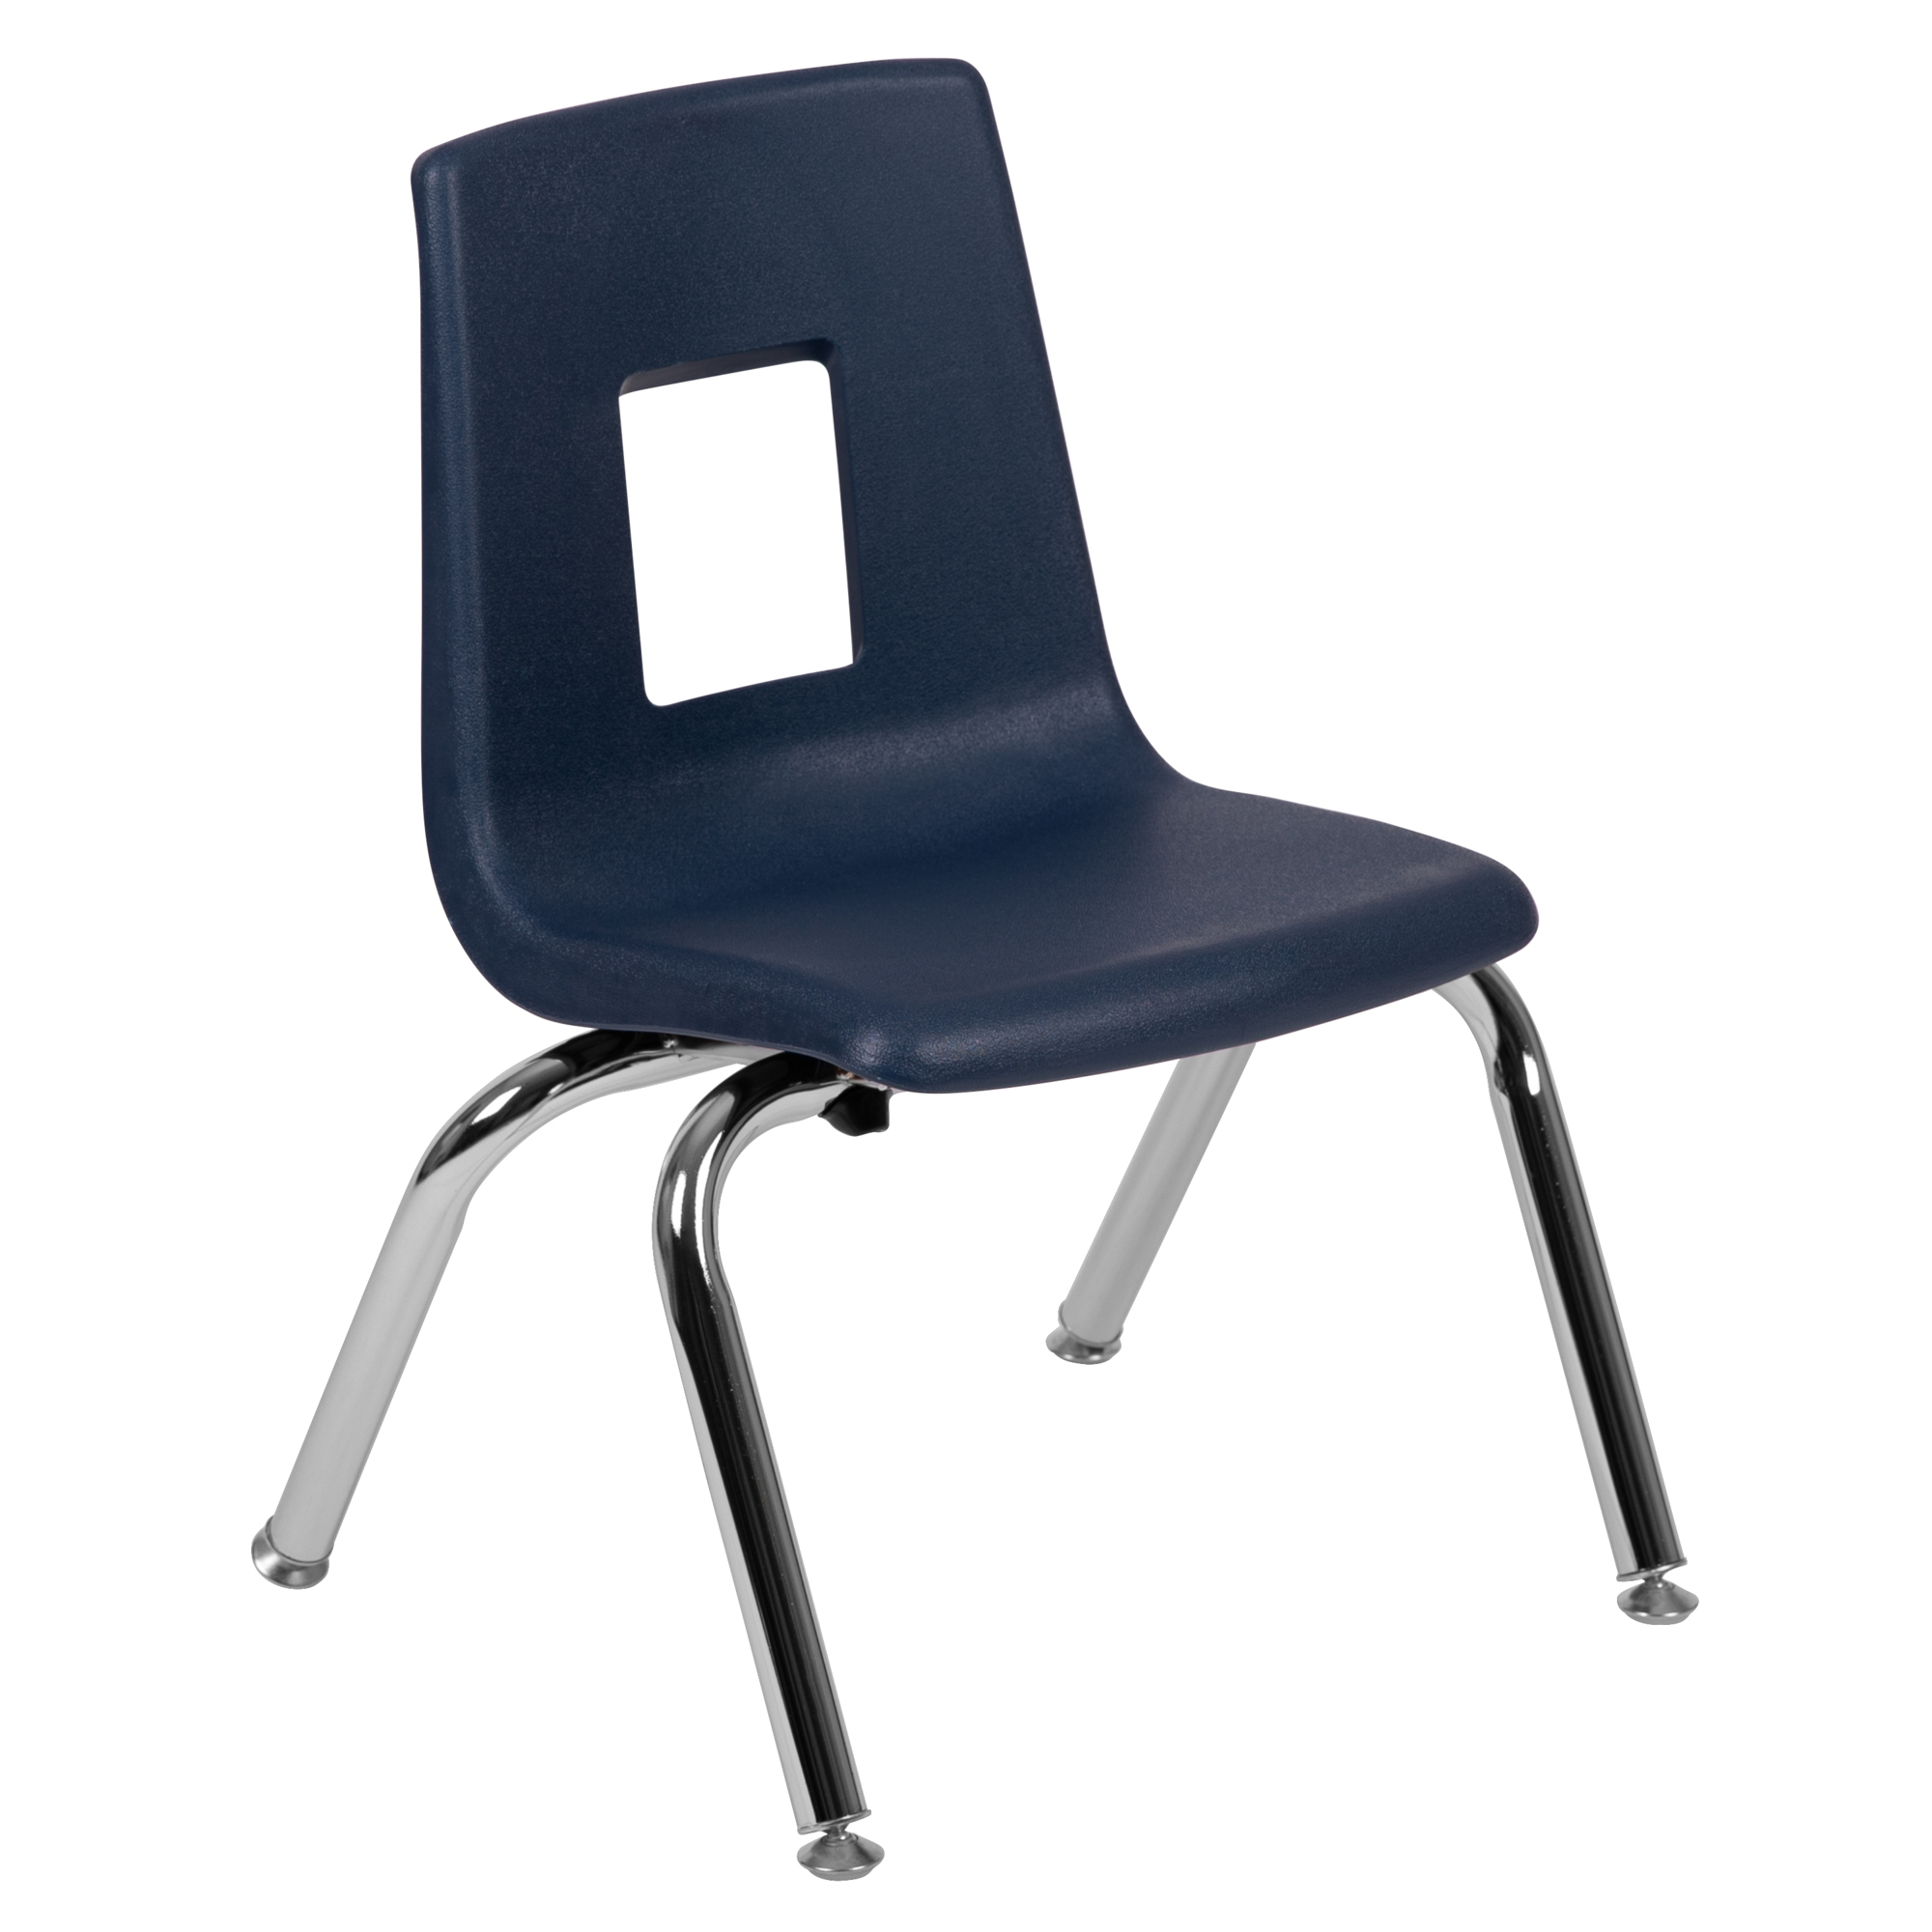 Flash Furniture, Navy Student Stack Chair 12Inch - Classroom Chair, Primary Color Blue, Included (qty.) 1, Model ADVSSC12NAVY